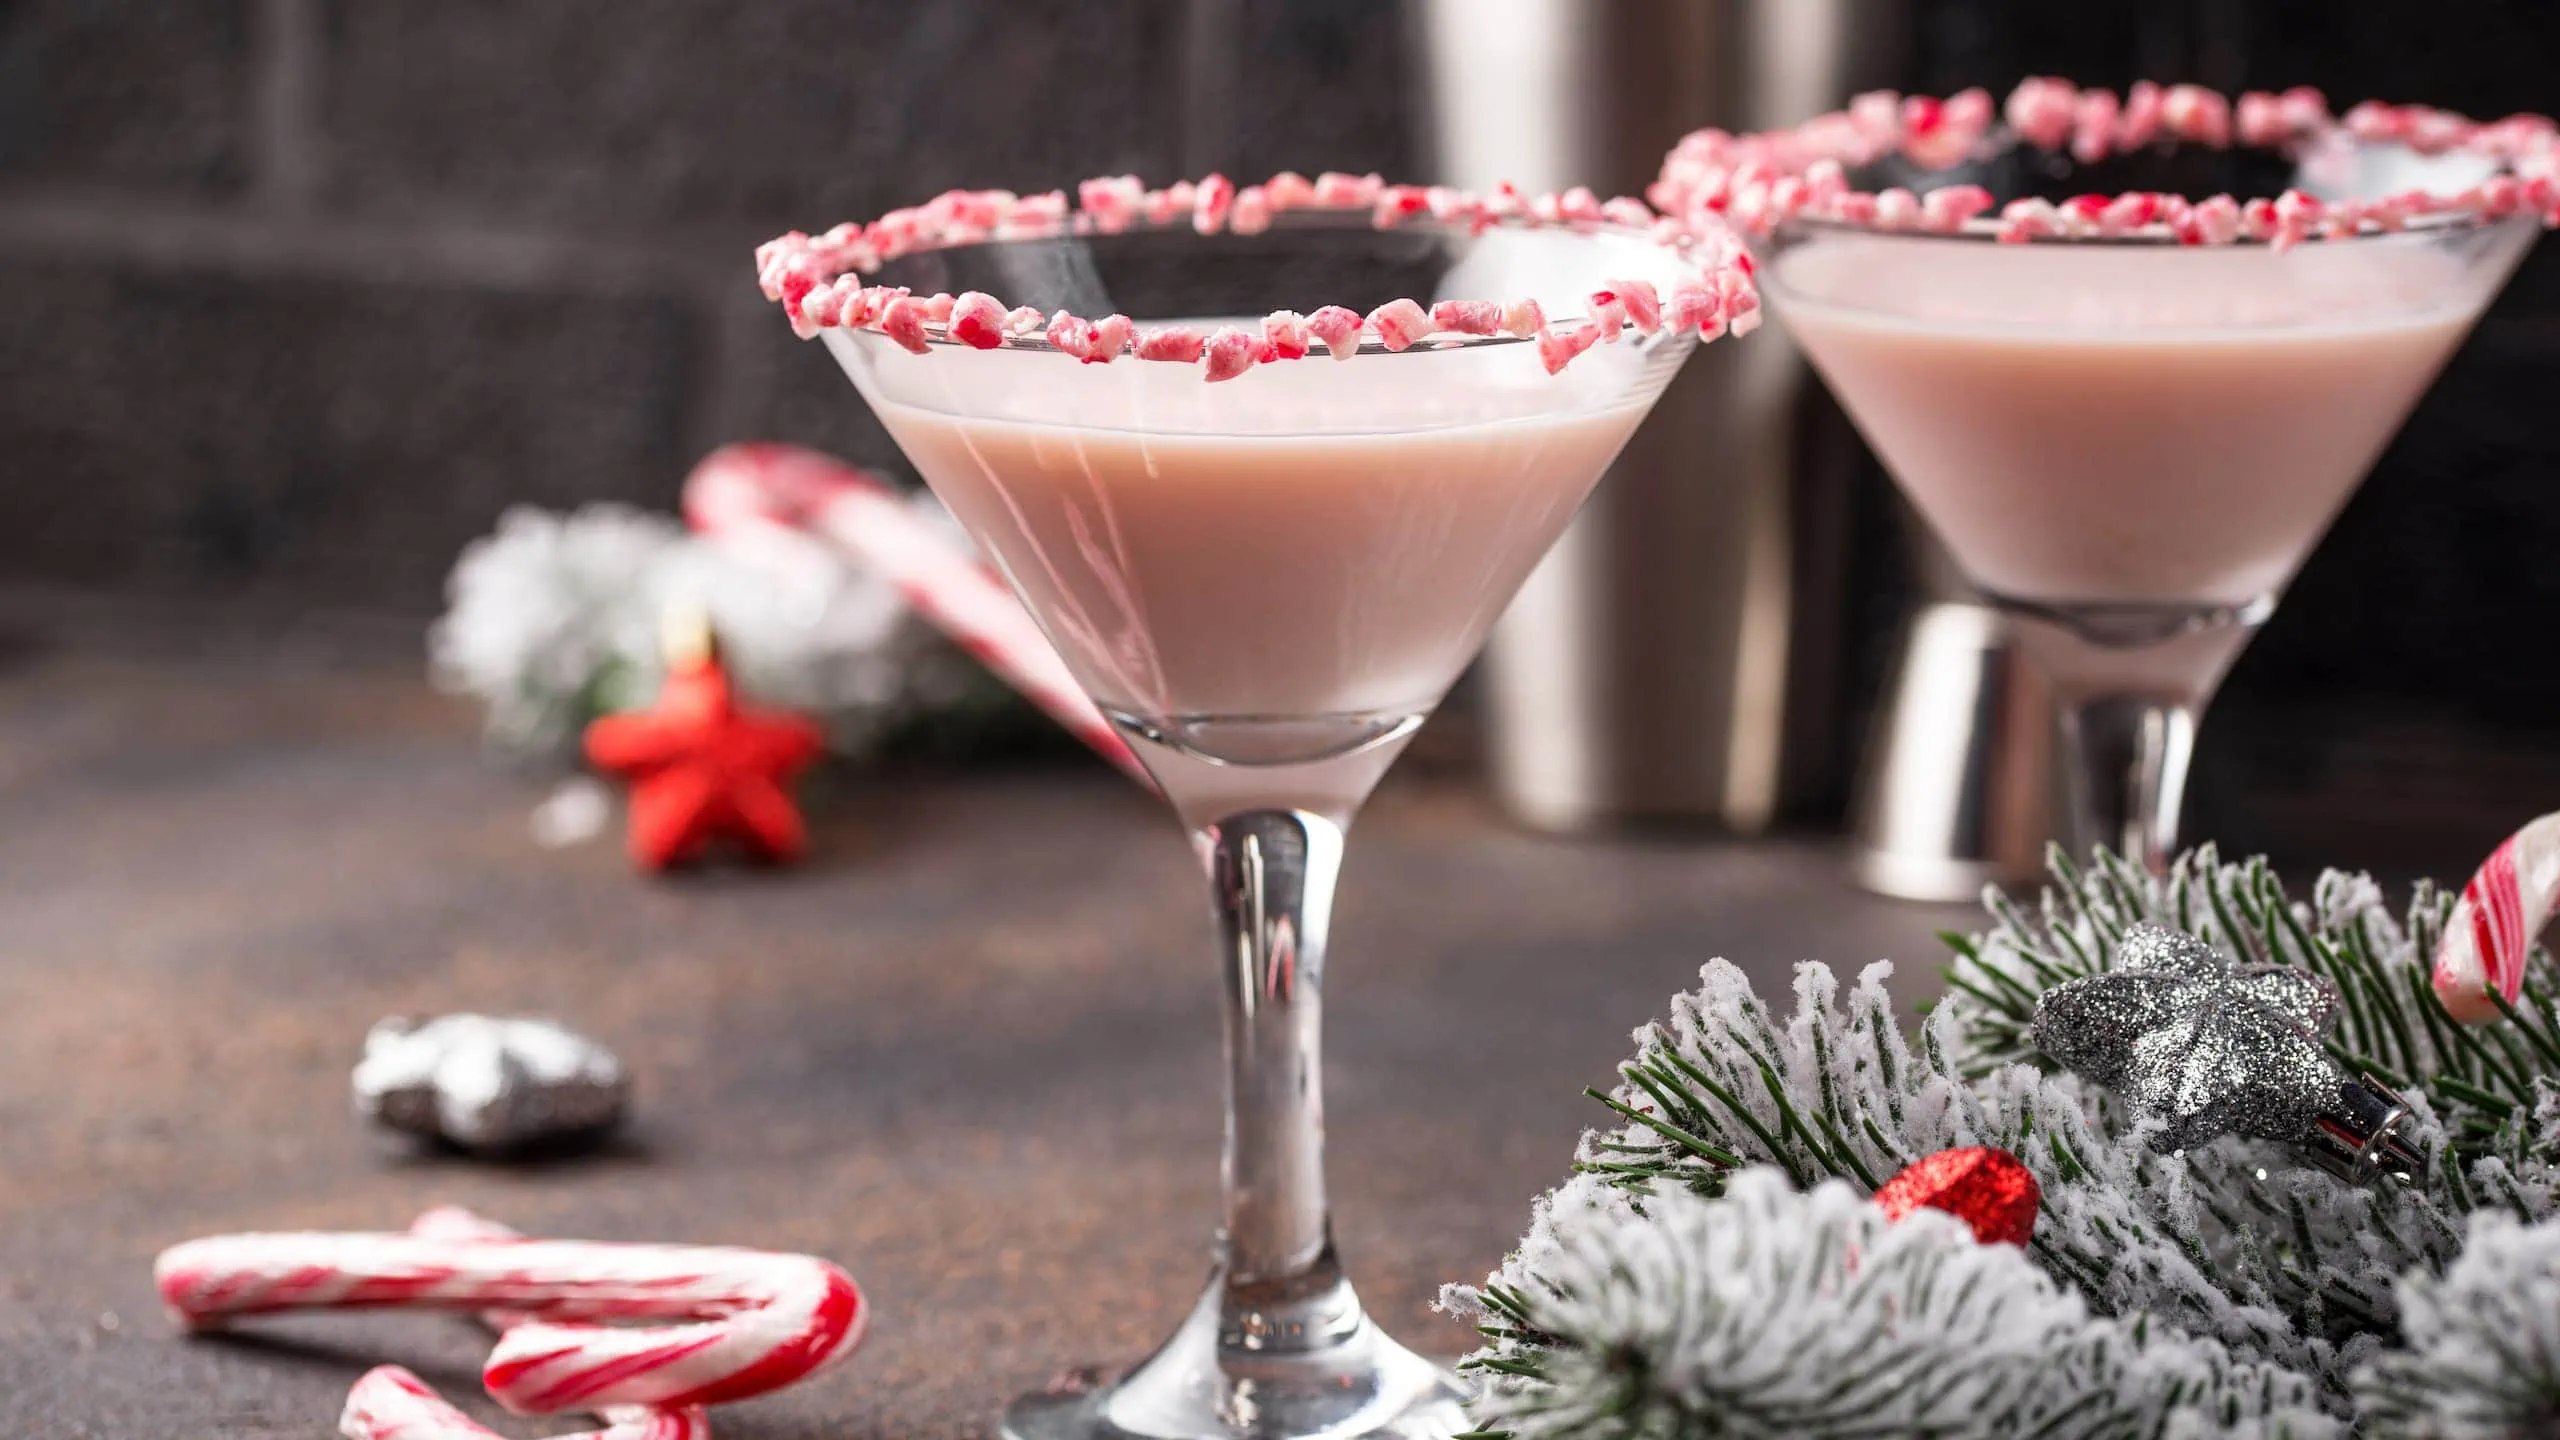 Our version of RumChata's peppermint bark